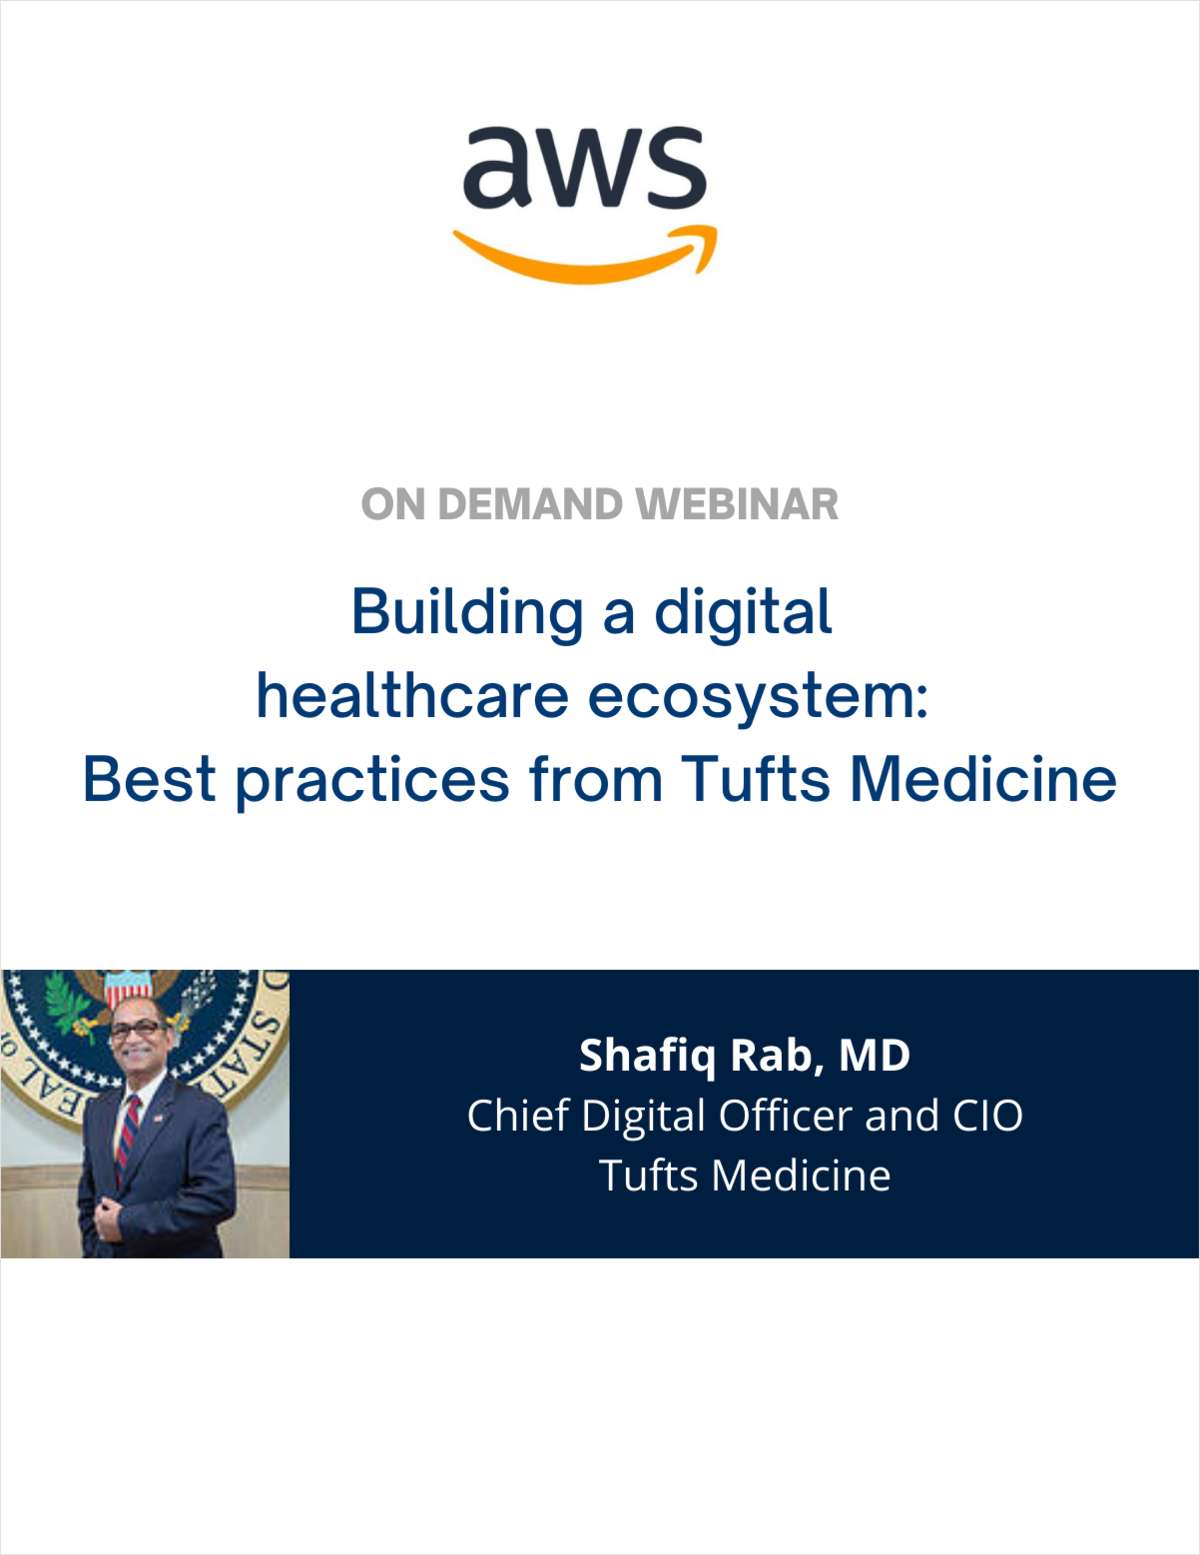 Building a Digital Healthcare Ecosystem: Best Practices from Tufts Medicine